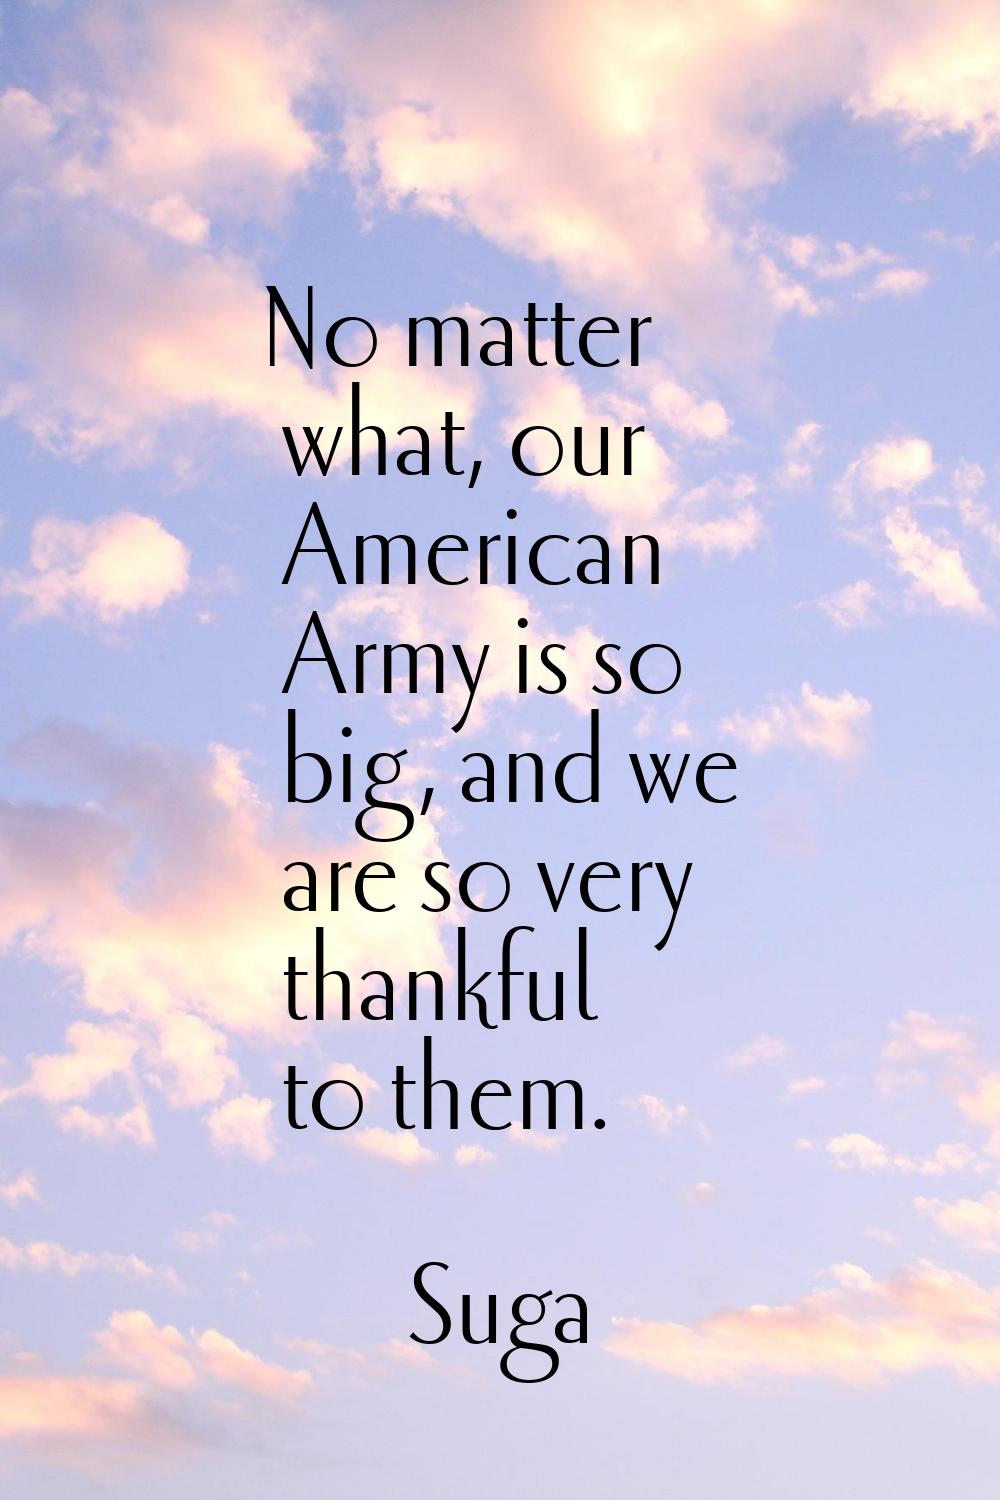 No matter what, our American Army is so big, and we are so very thankful to them.